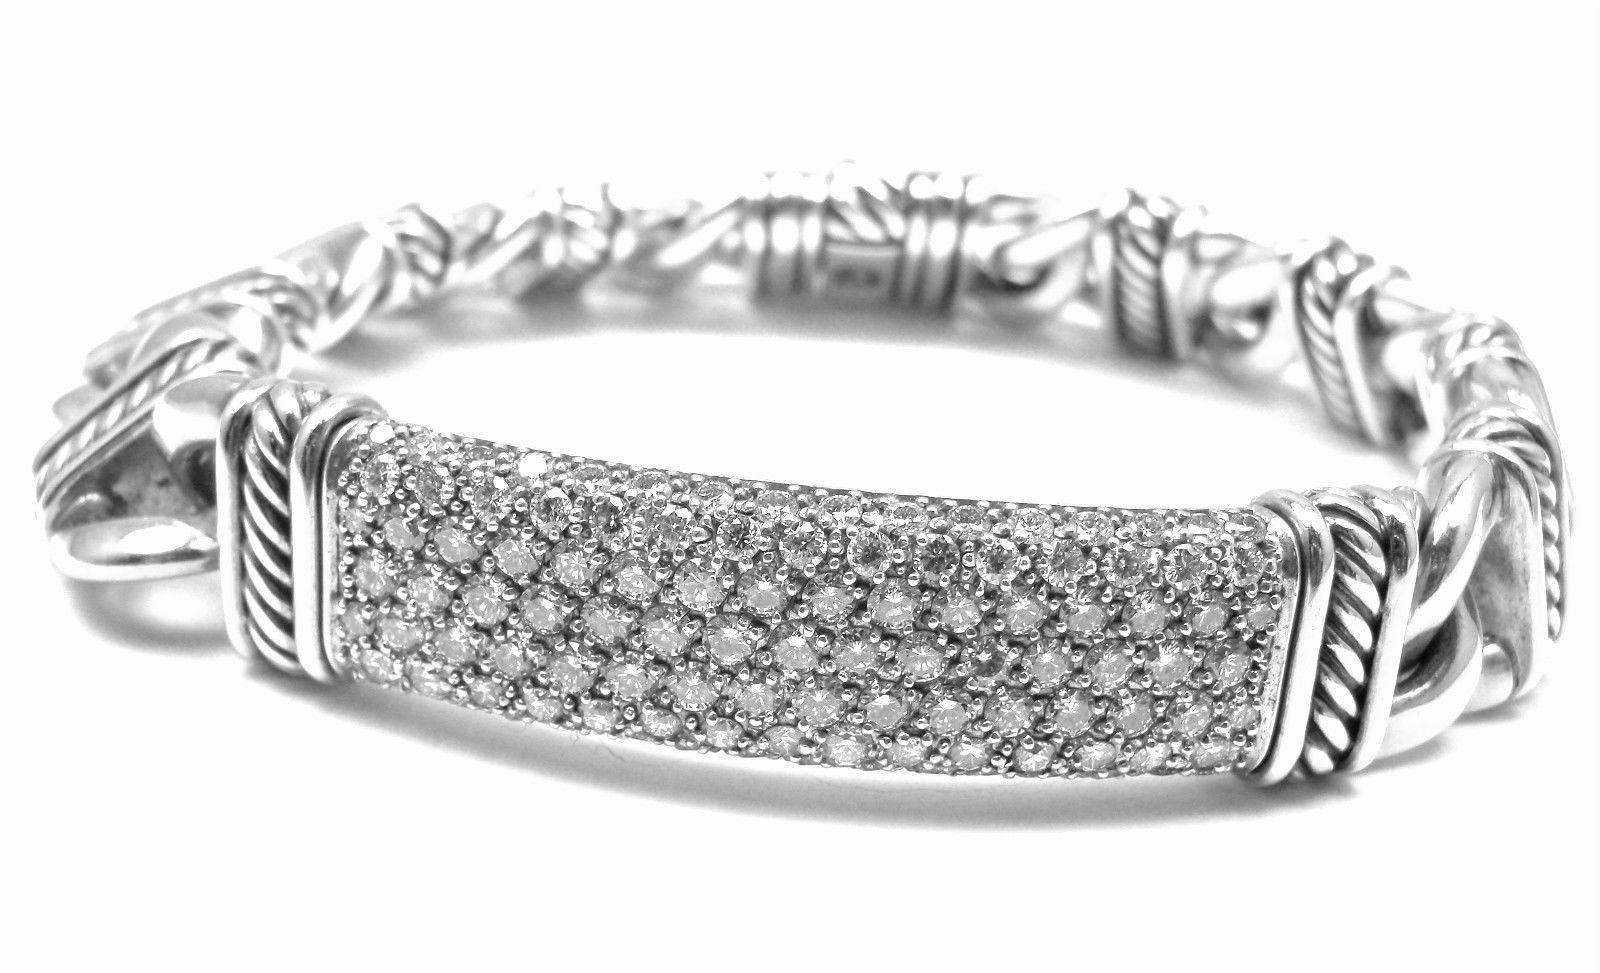 Sterling Silver White Diamond ID Link Bracelet by David Yurman from Estate of Jackie Collins.
This bracelet used to belong to Jackie Collins and was purchased from her jewelry estate collection.
With Round white diamonds total weight approx.